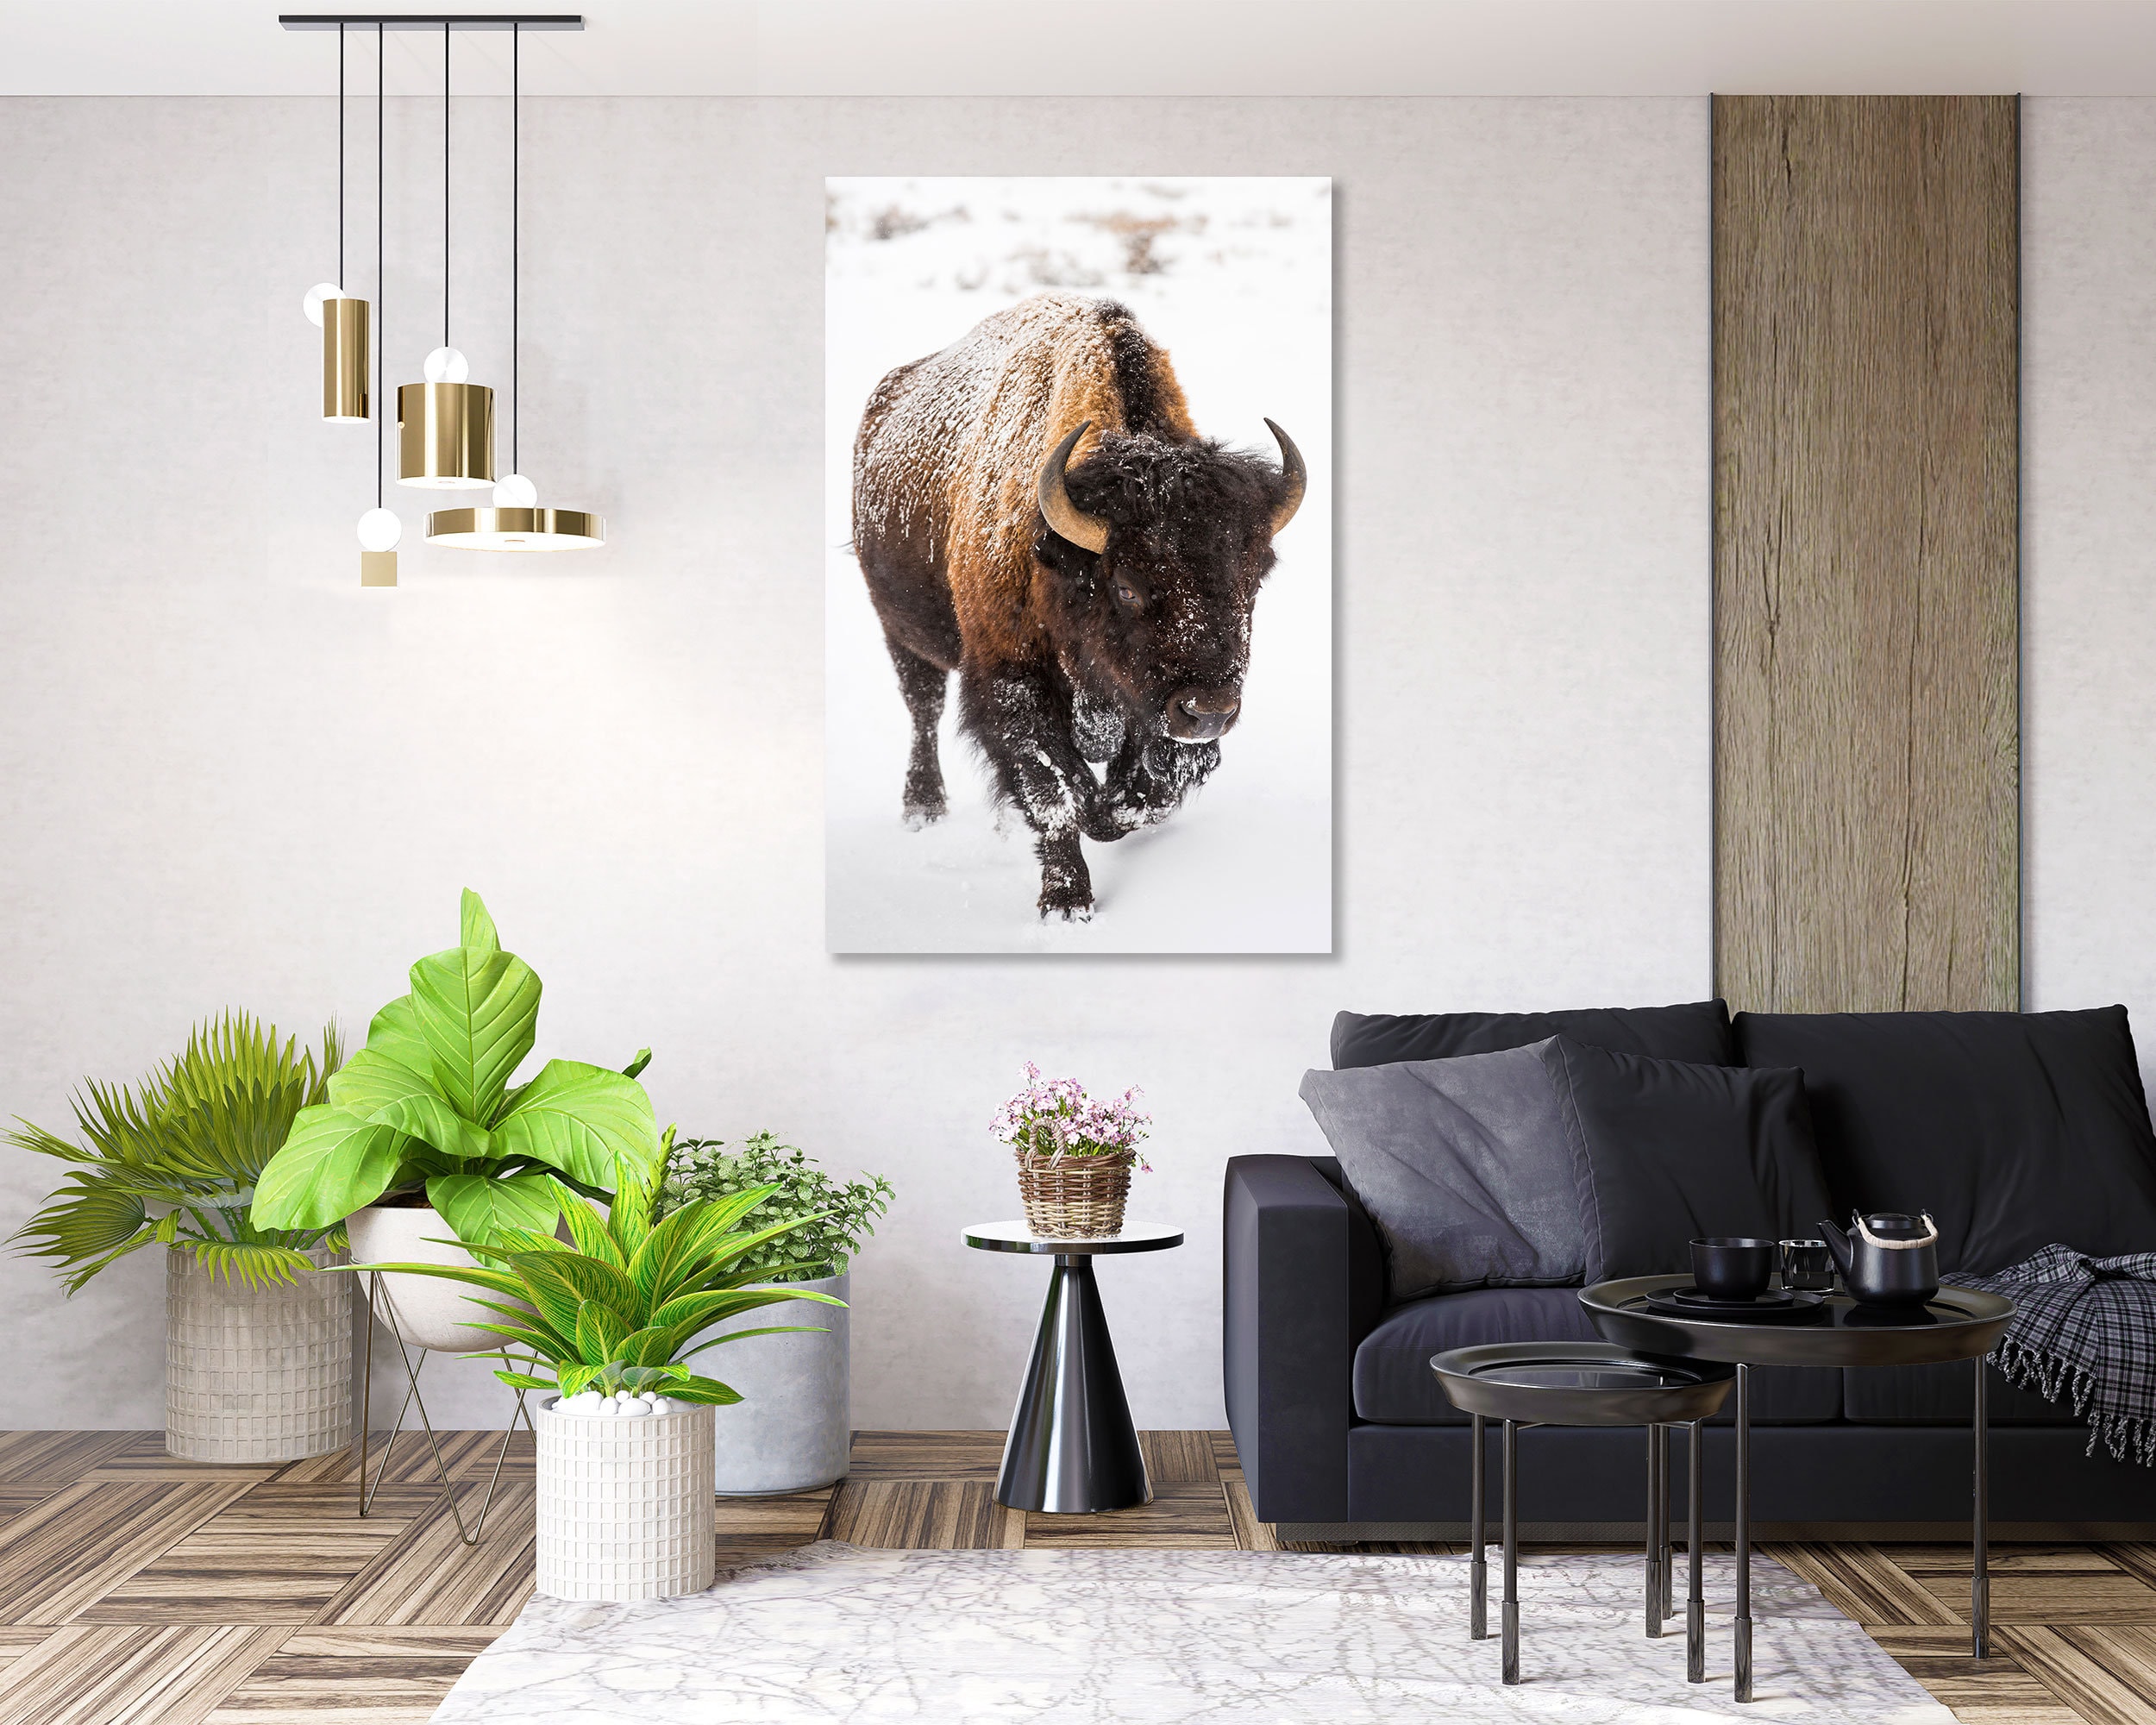 American buffalo For sale as Framed Prints, Photos, Wall Art and Photo Gifts